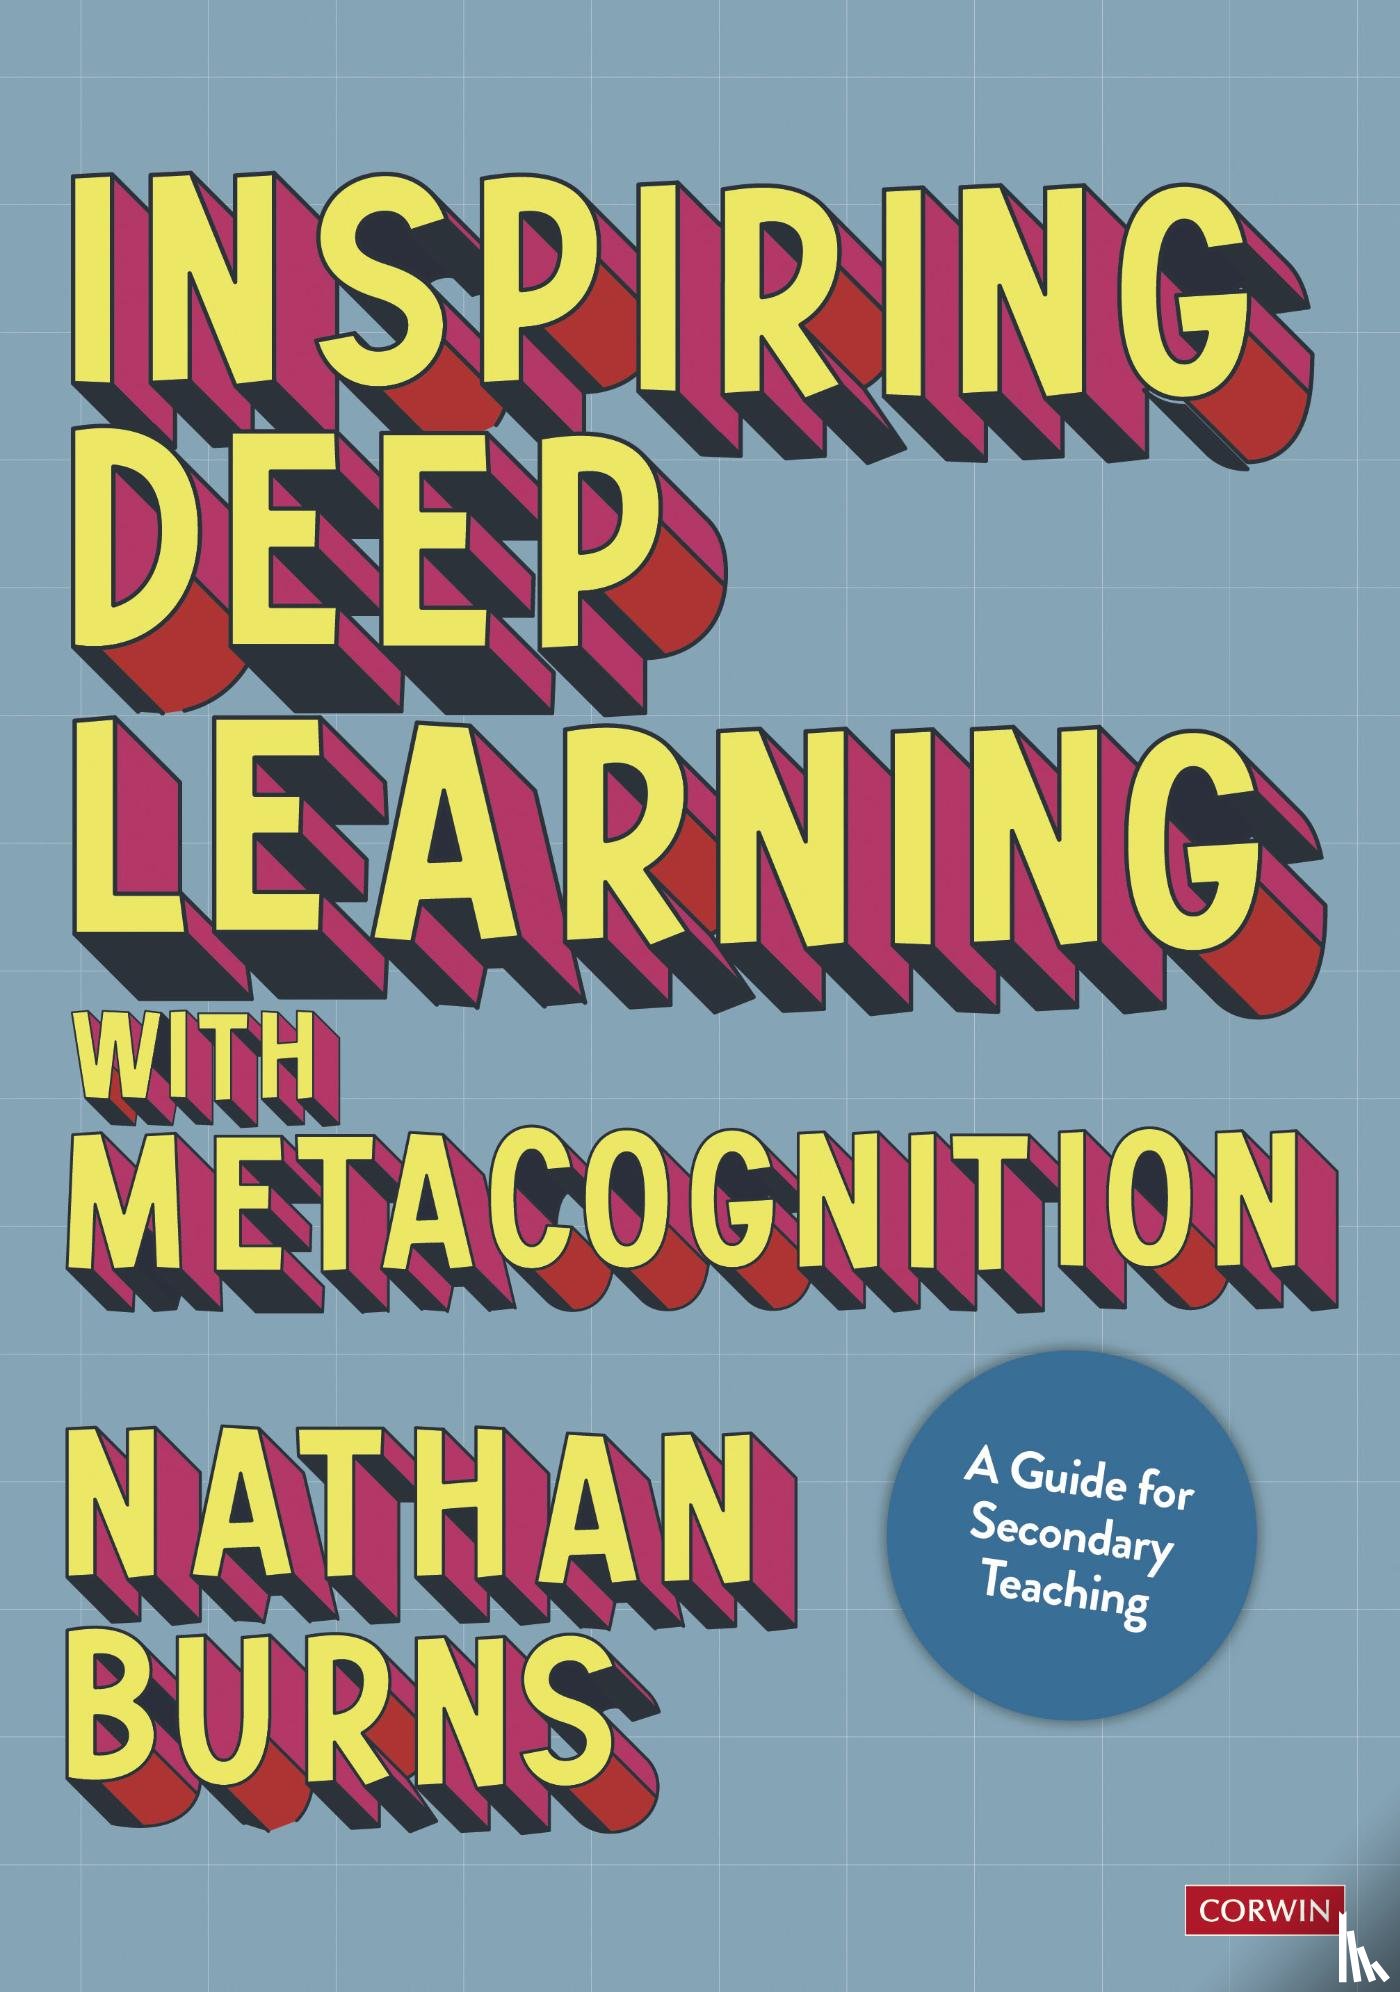 Burns, Nathan - Inspiring Deep Learning with Metacognition